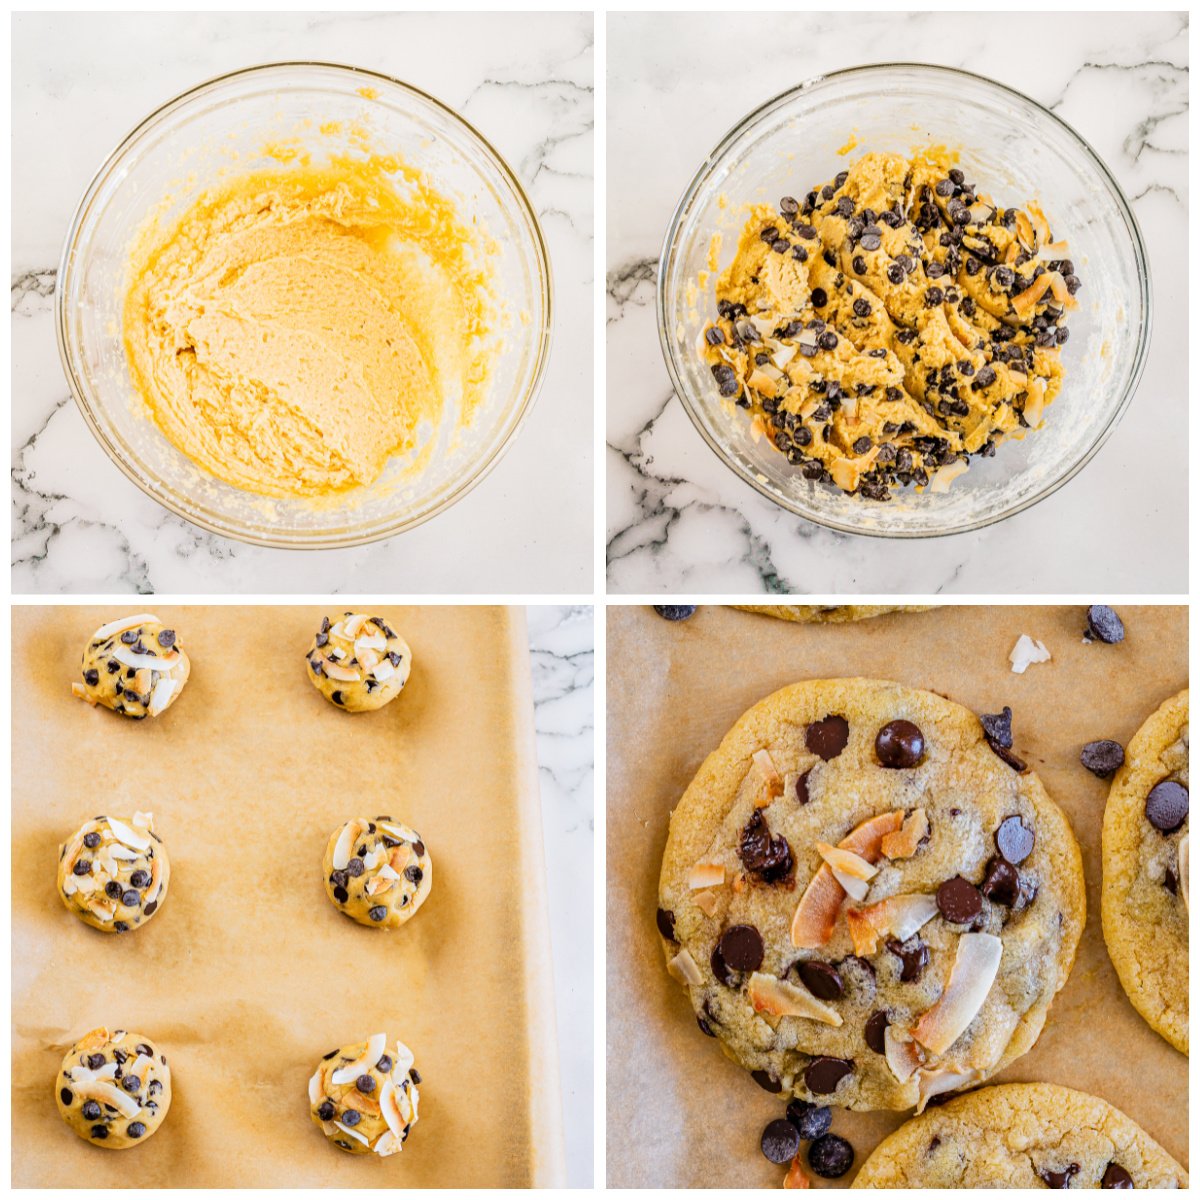 Step by step photos on how to make Coconut Chocolate Chip Cookies.